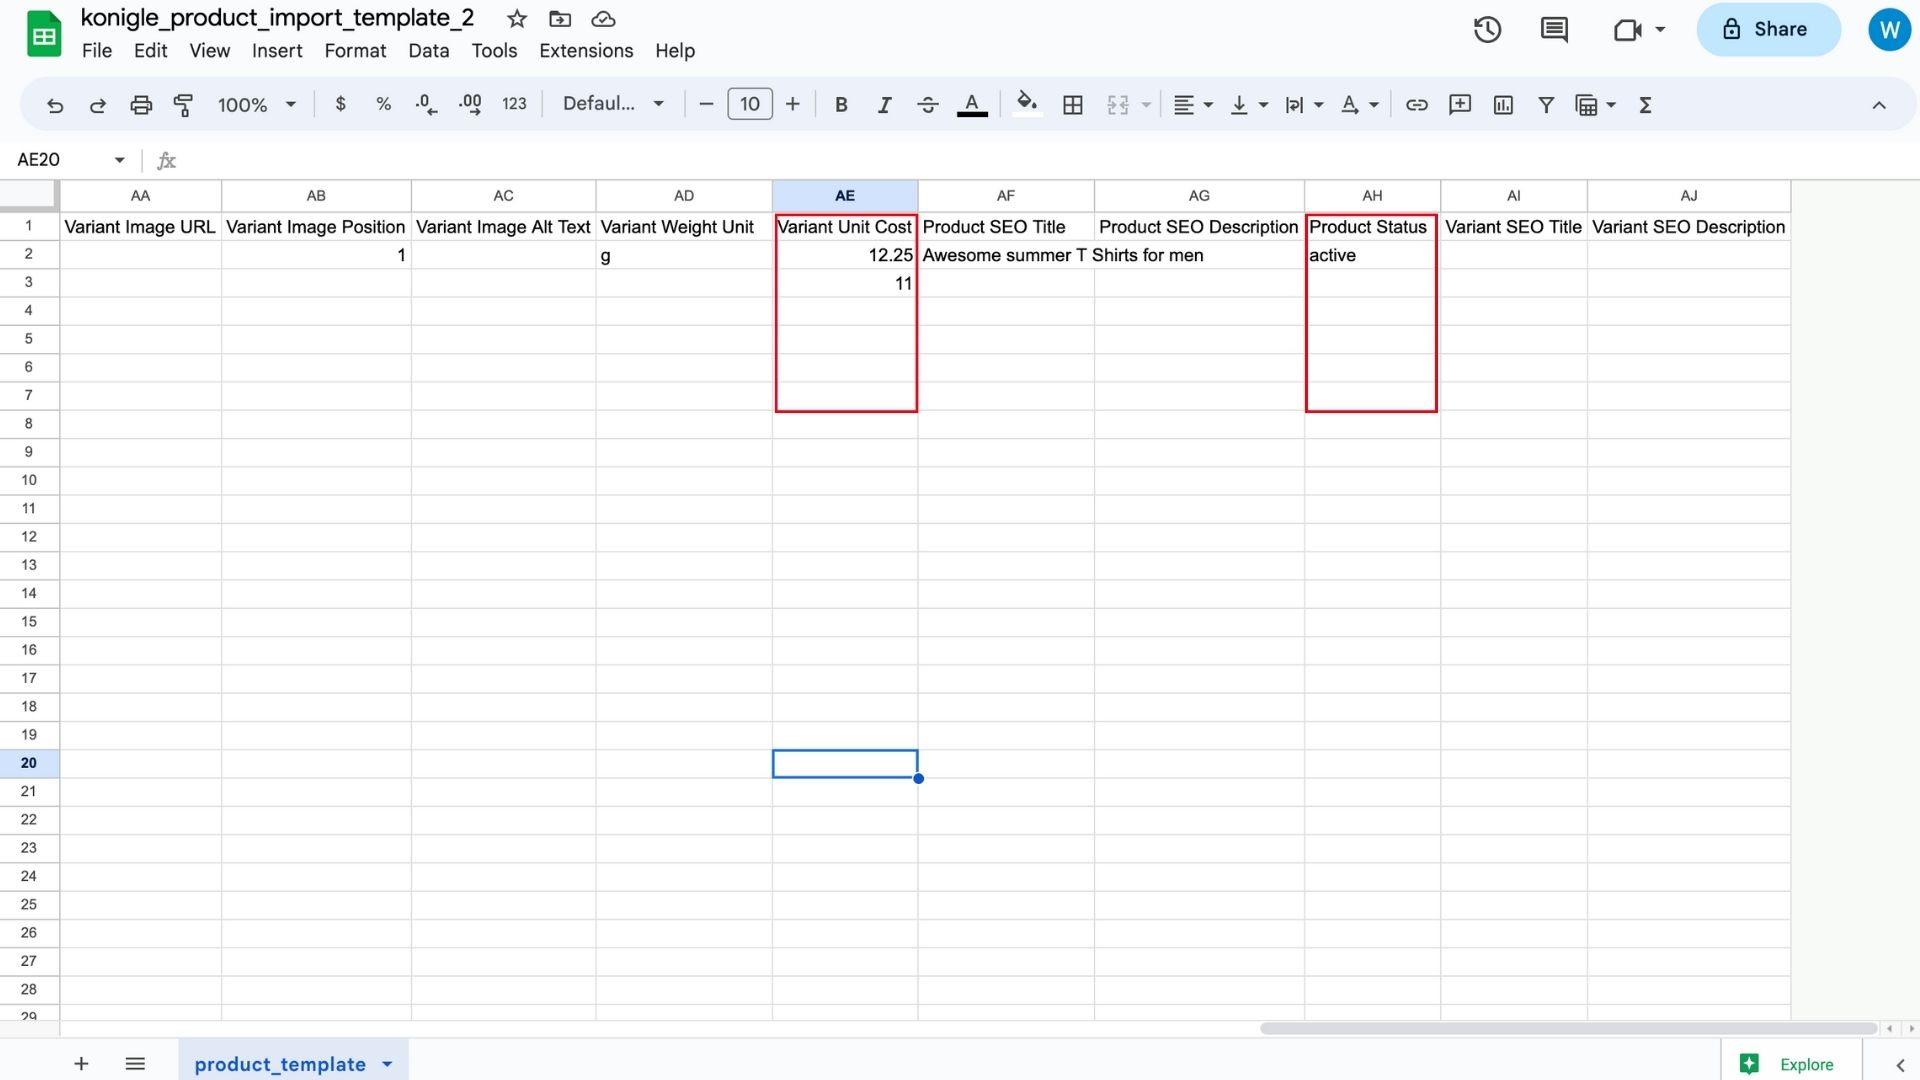 Product Import template on Google sheets